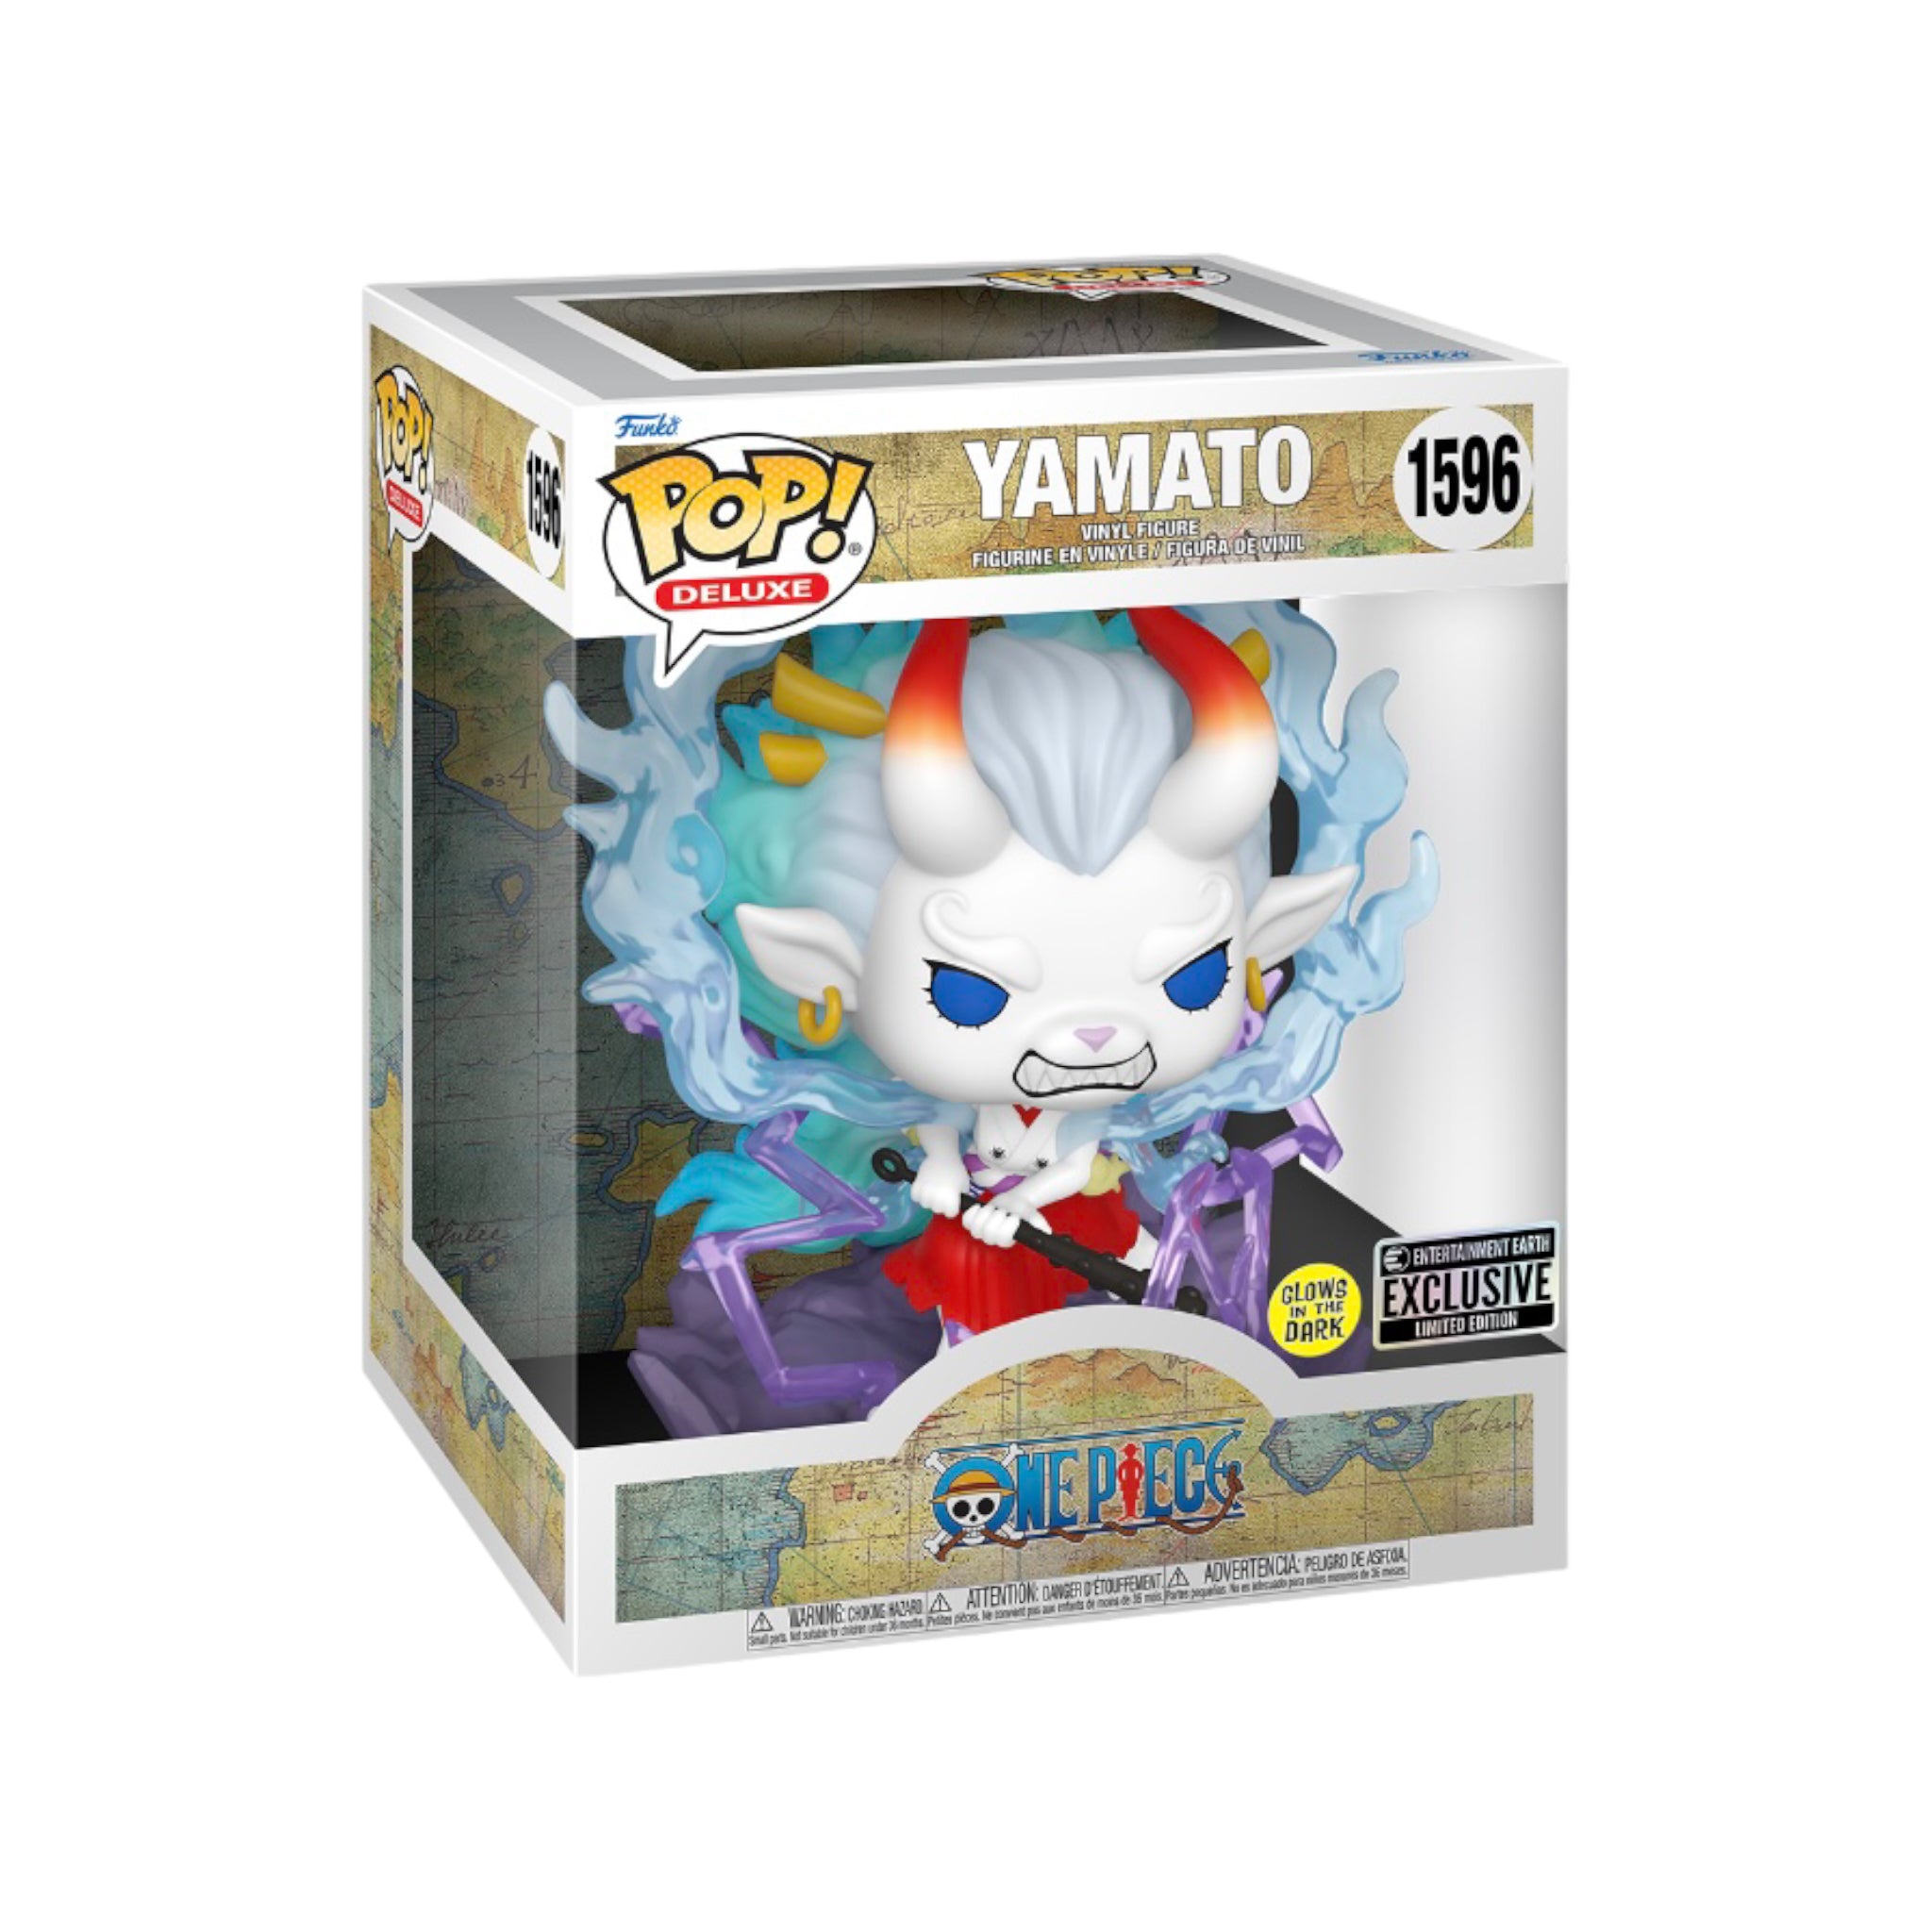 Yamato #1596 (Beast Form) (Glows in the Dark) Deluxe Funko Pop! - One Piece - Entertainment Earth Exclusive